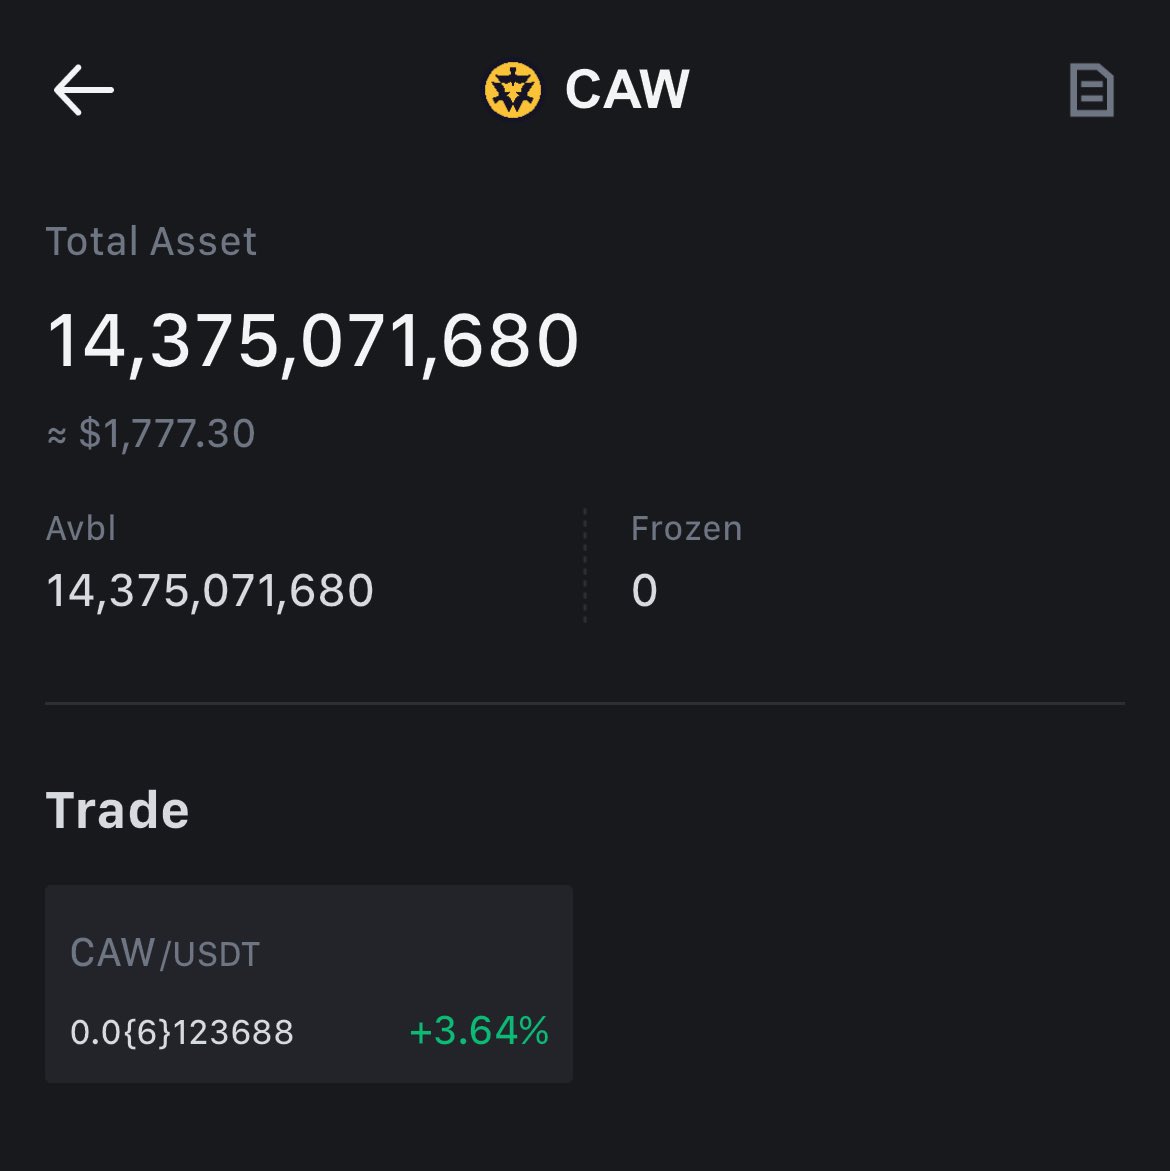 758th day hodl SCAW (may 25, 2024)
$1777
Teh appointed time is close #AHuntersDream
企
#CAW #cawmunity